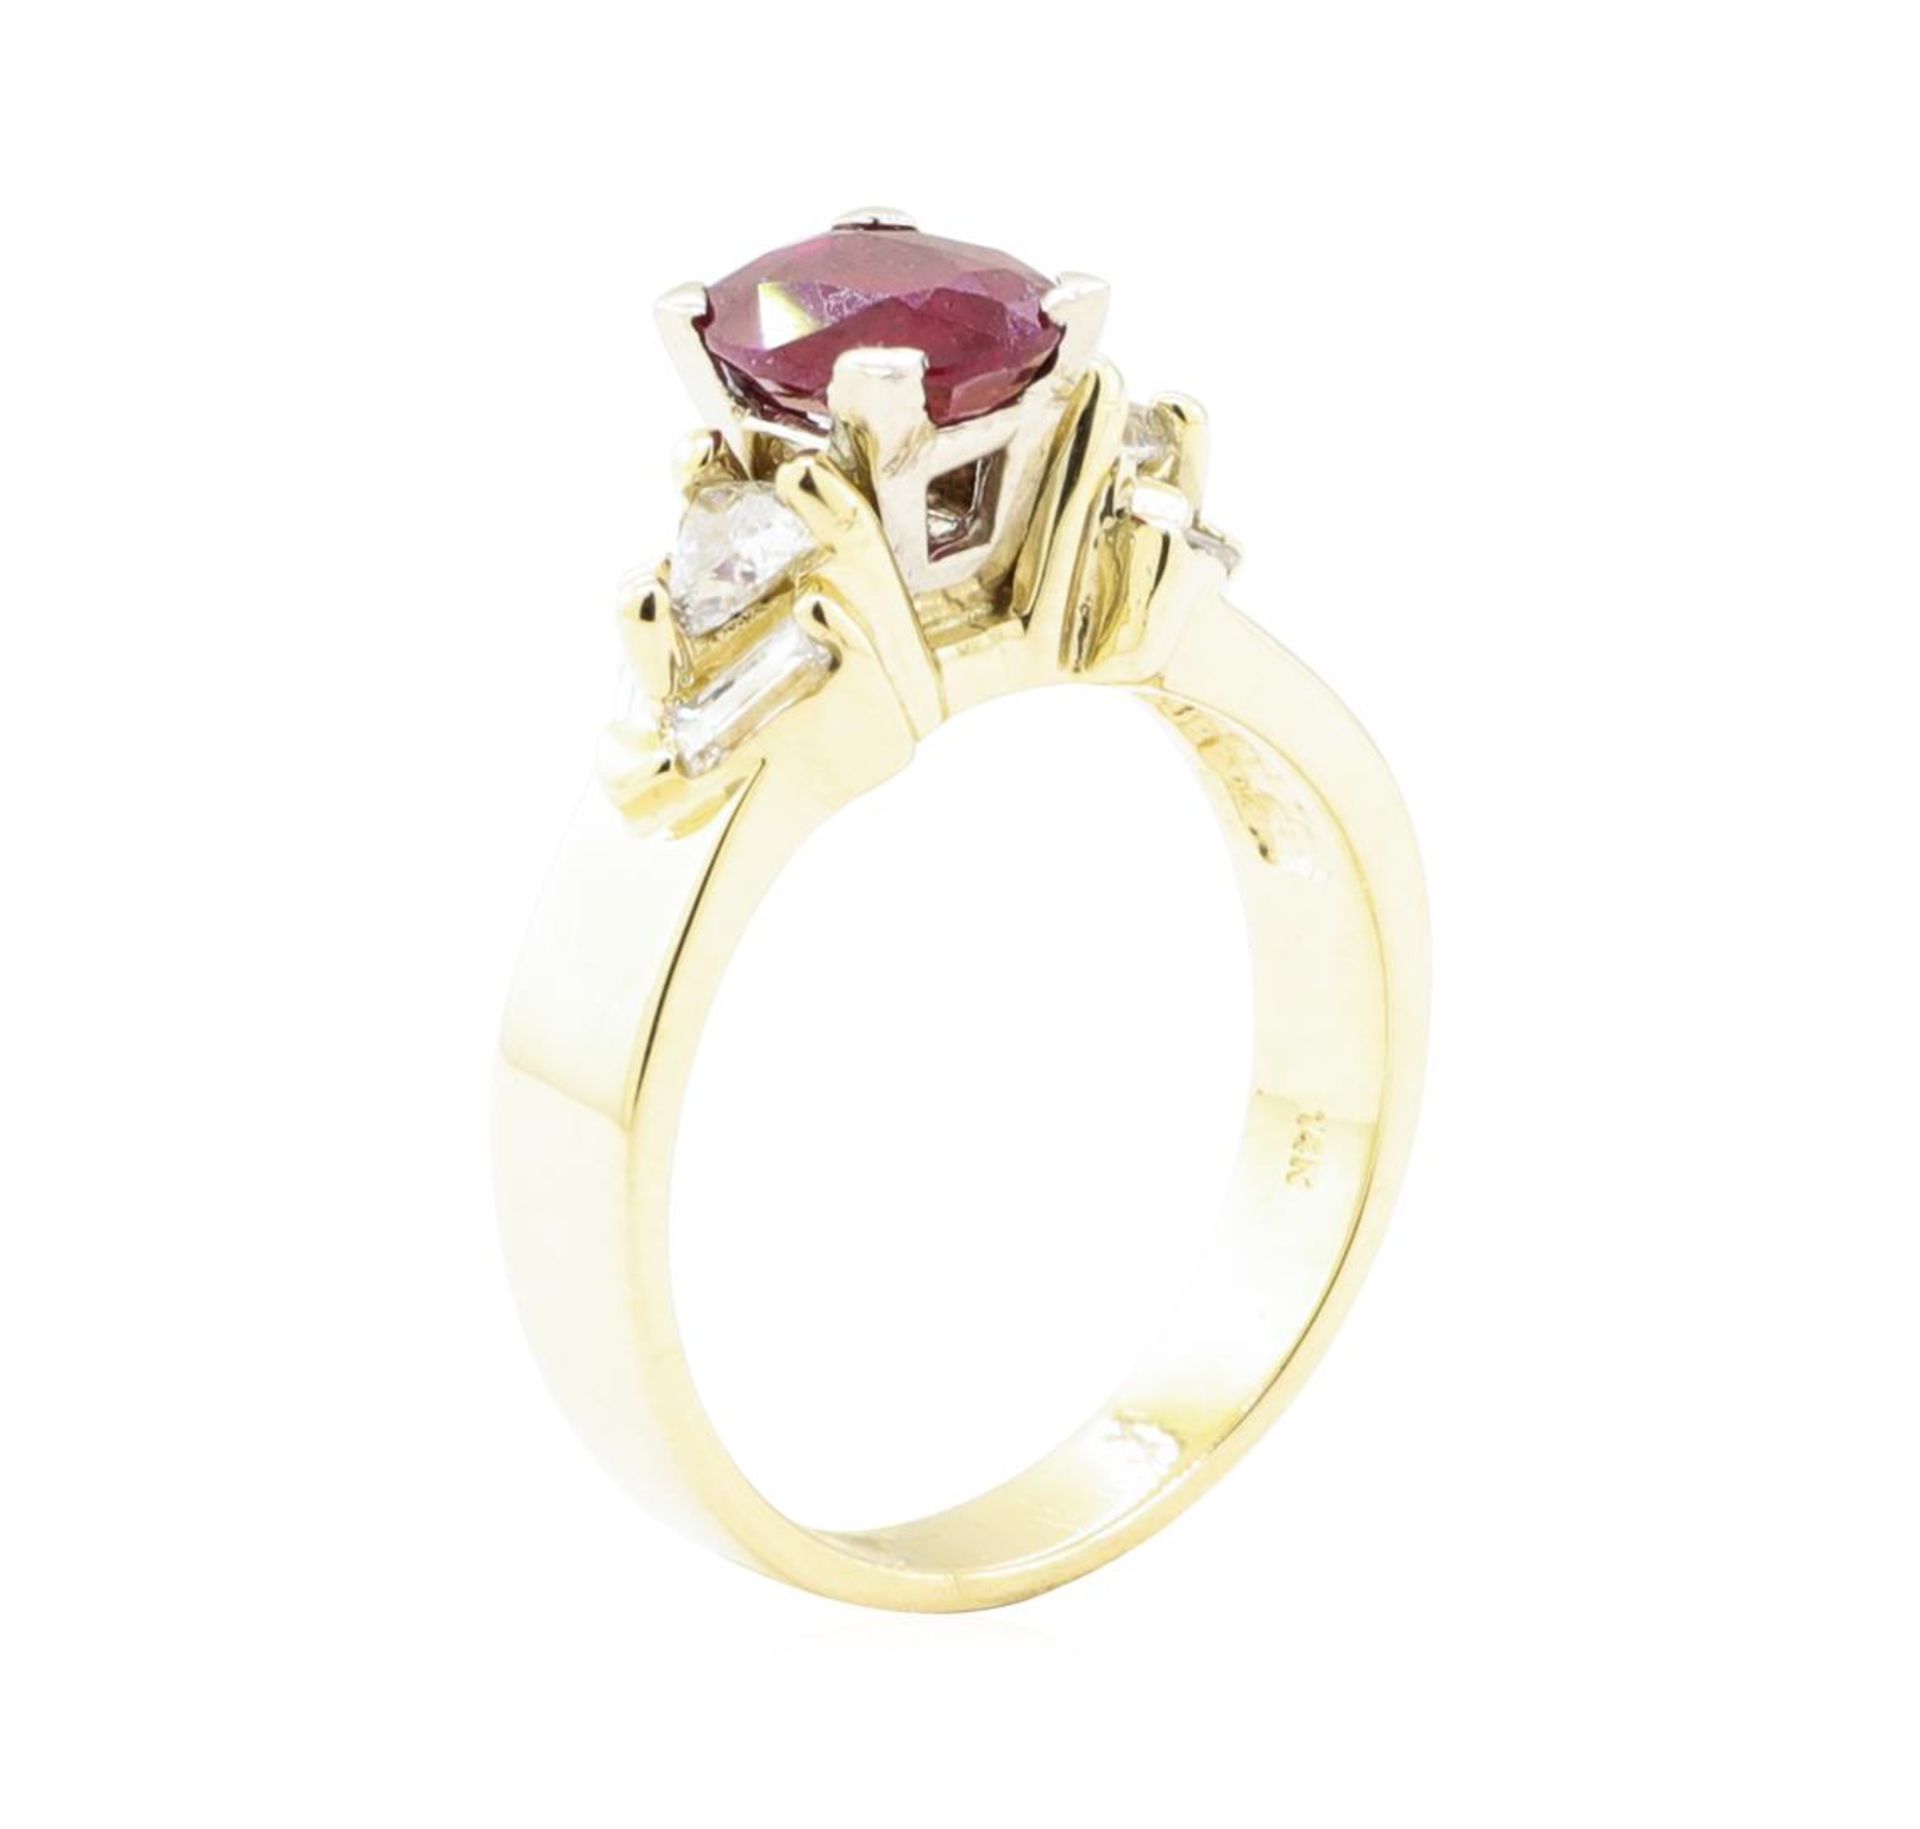 1.91ctw Ruby and Diamond Ring - 14KT Yellow Gold - Image 4 of 4